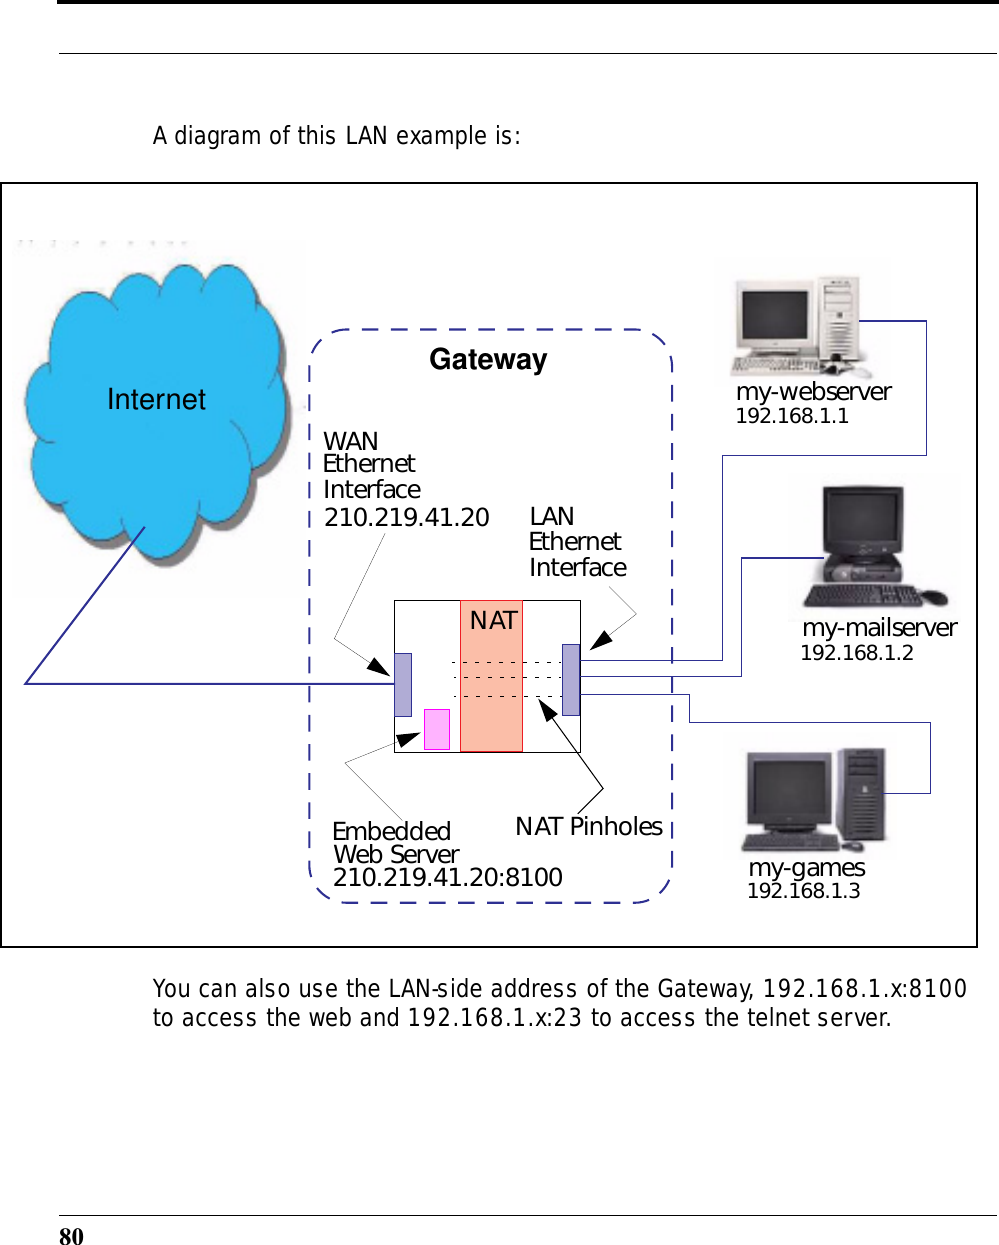 80A diagram of this LAN example is:You can also use the LAN-side address of the Gateway, 192.168.1.x:8100 to access the web and 192.168.1.x:23 to access the telnet server.WANLANEthernet Interface192.168.1.1192.168.1.2192.168.1.3my-webservermy-mailservermy-gamesGatewayNATNAT PinholesEmbeddedWeb Server210.219.41.20210.219.41.20:8100Ethernet InterfaceInternet